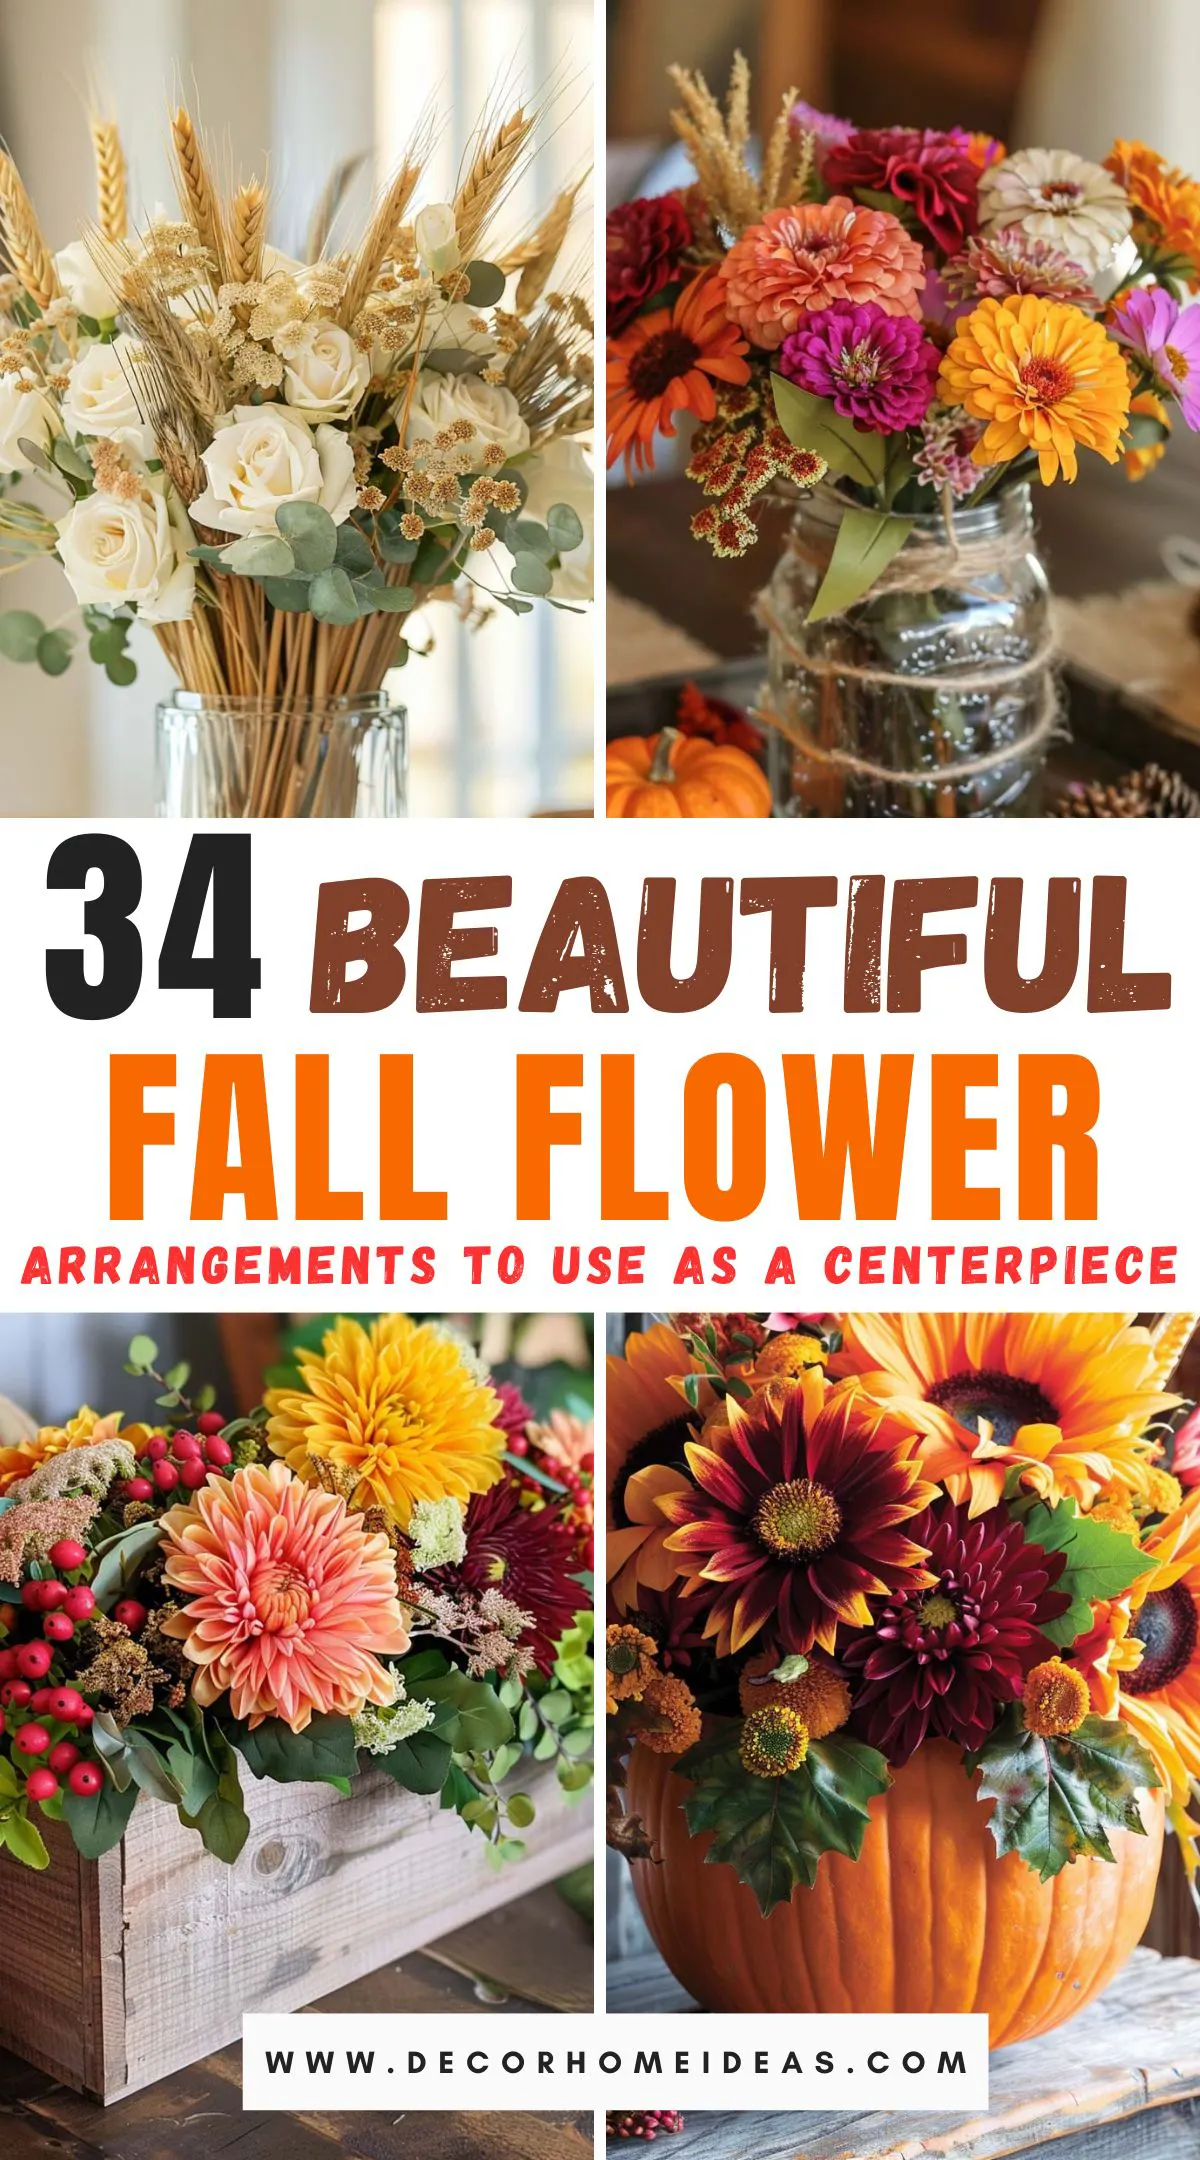 Elevate your autumn decor with the 34 most beautiful fall flower arrangements perfect for centerpieces. Discover stunning combinations of rich hues and seasonal blooms that bring warmth and charm to any table setting. From rustic elegance to modern sophistication, these arrangements will inspire you to create captivating fall centerpieces for your home.